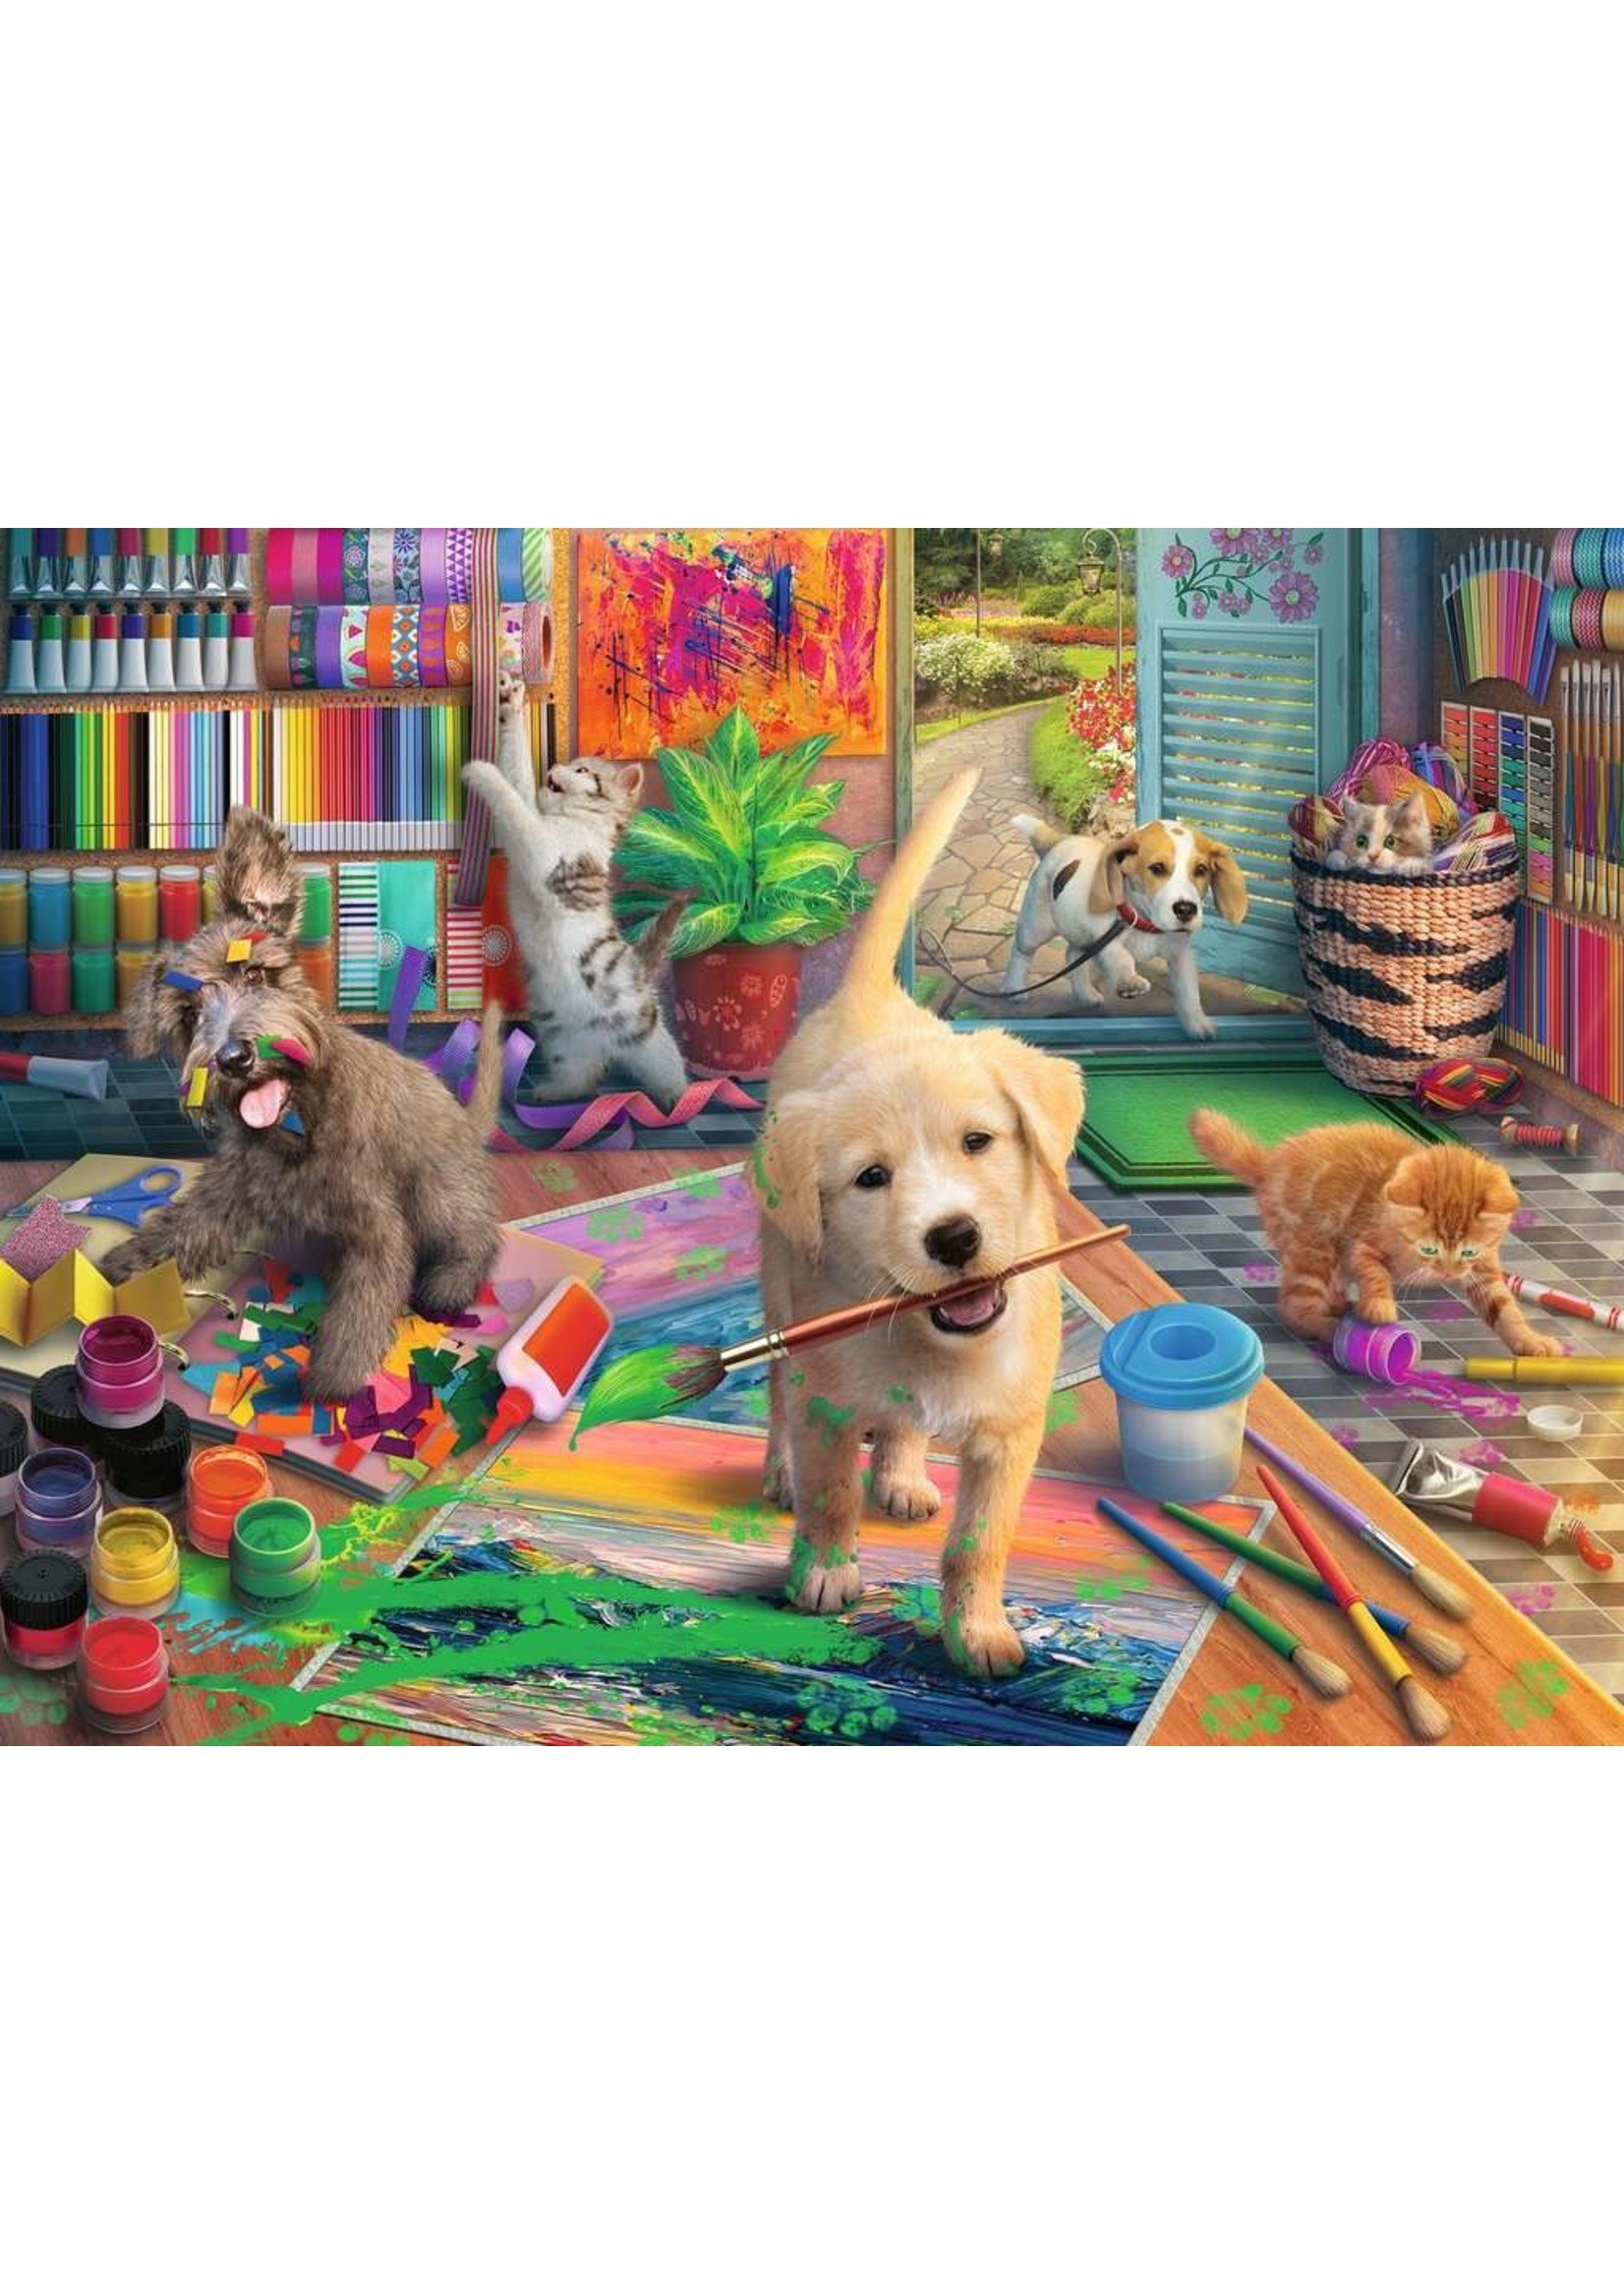 Brand New/Sealed - Ravensburger Dog Ingenuous Eyes 500 Piece Puzzle - Cute  Puppy